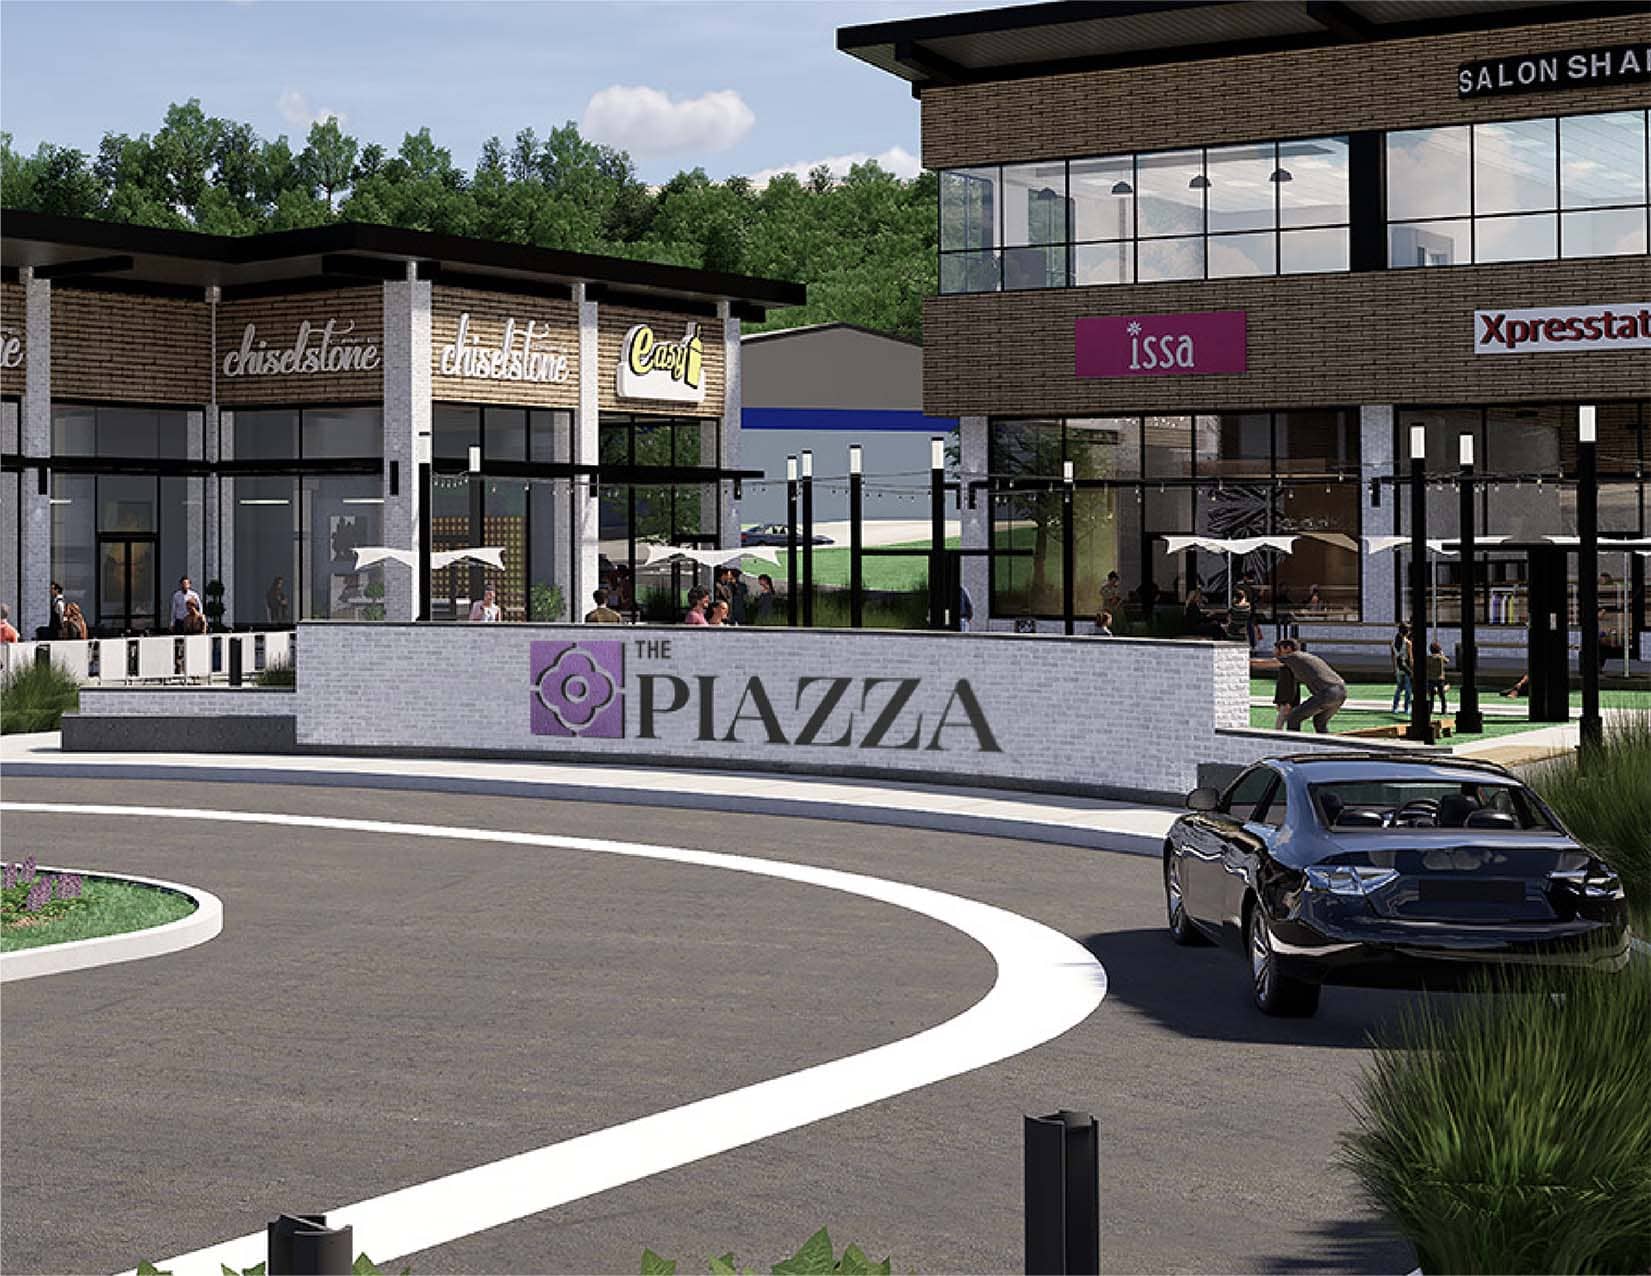 digital render of a short wall with the piazza logo in large print in front of buildings